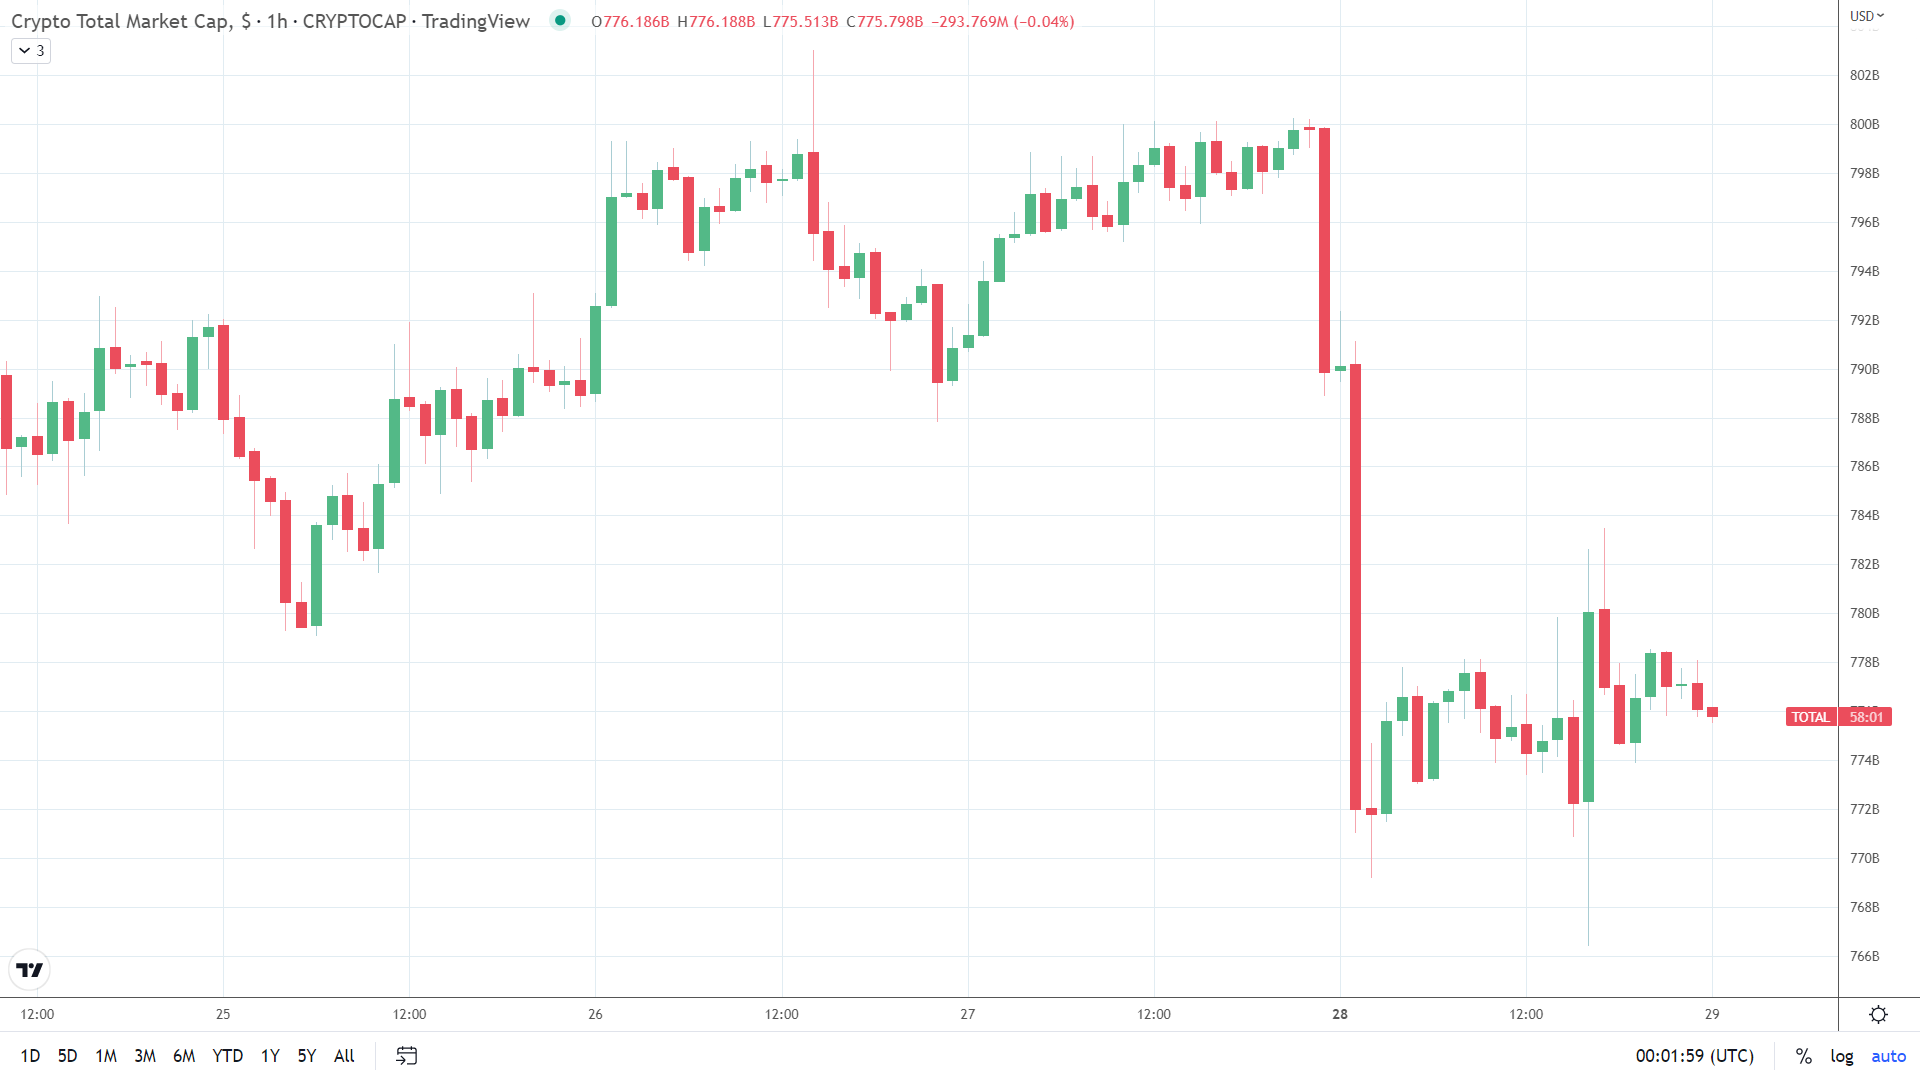 Crypto market steadied late in the session.